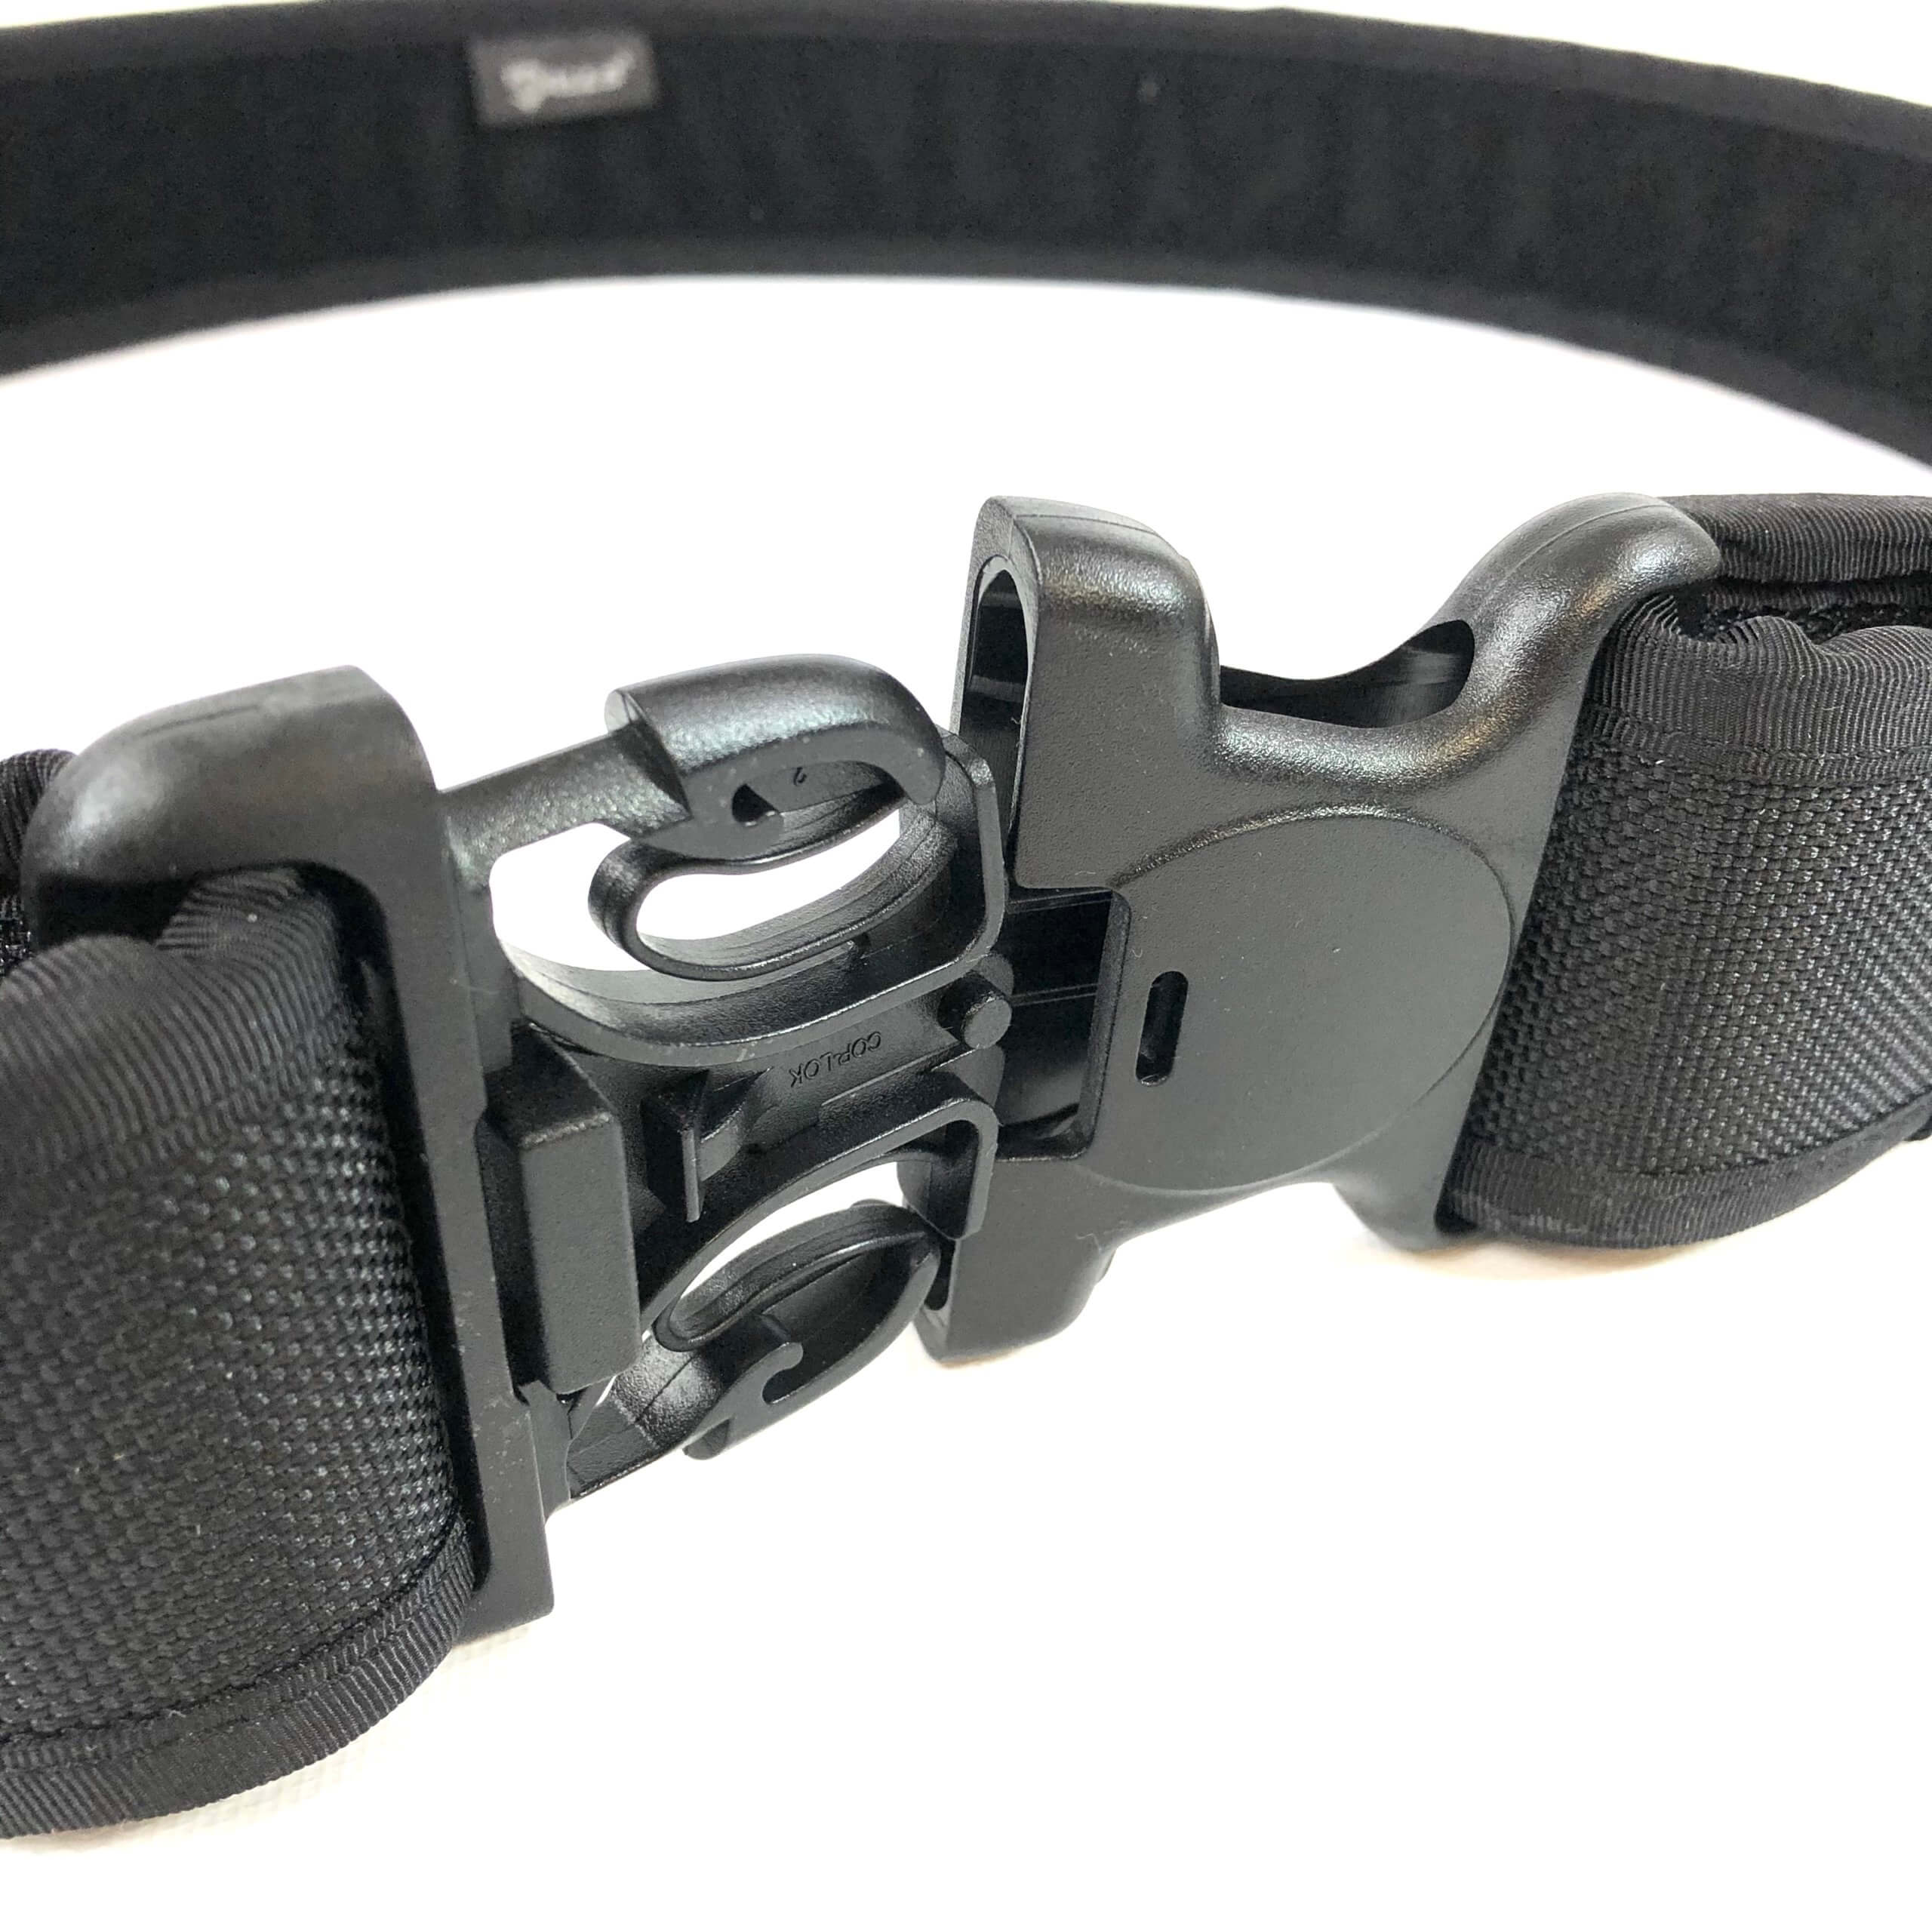 SMALL Black Military Police Tactical Waist Belt Details about   Galls Molded Nylon Duty Belt 